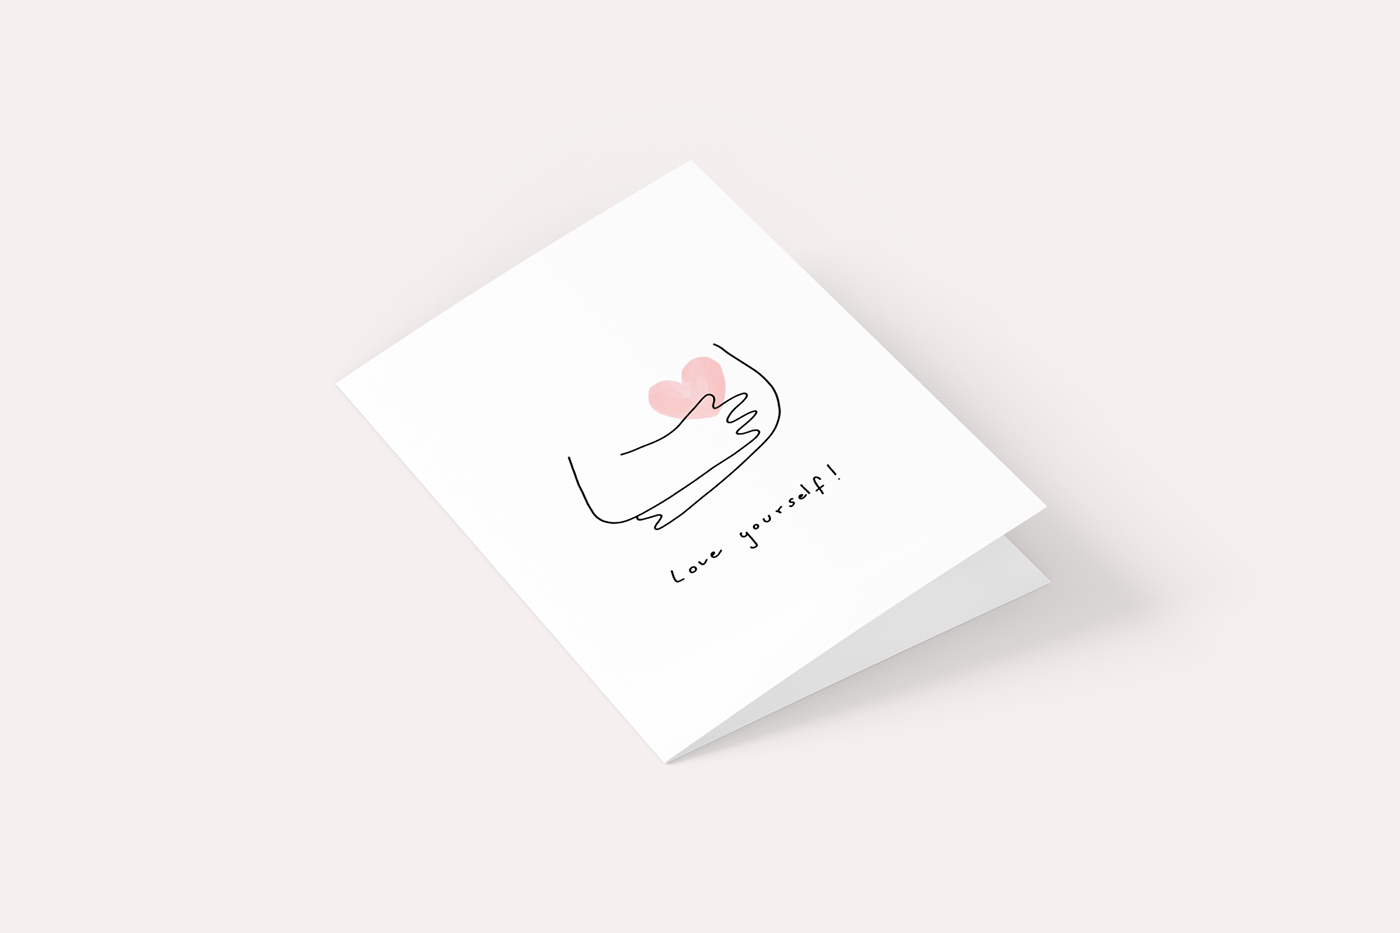 acceptance birthday card body positive greeting card greetings illustration design love yourself print design  selflove stationery card